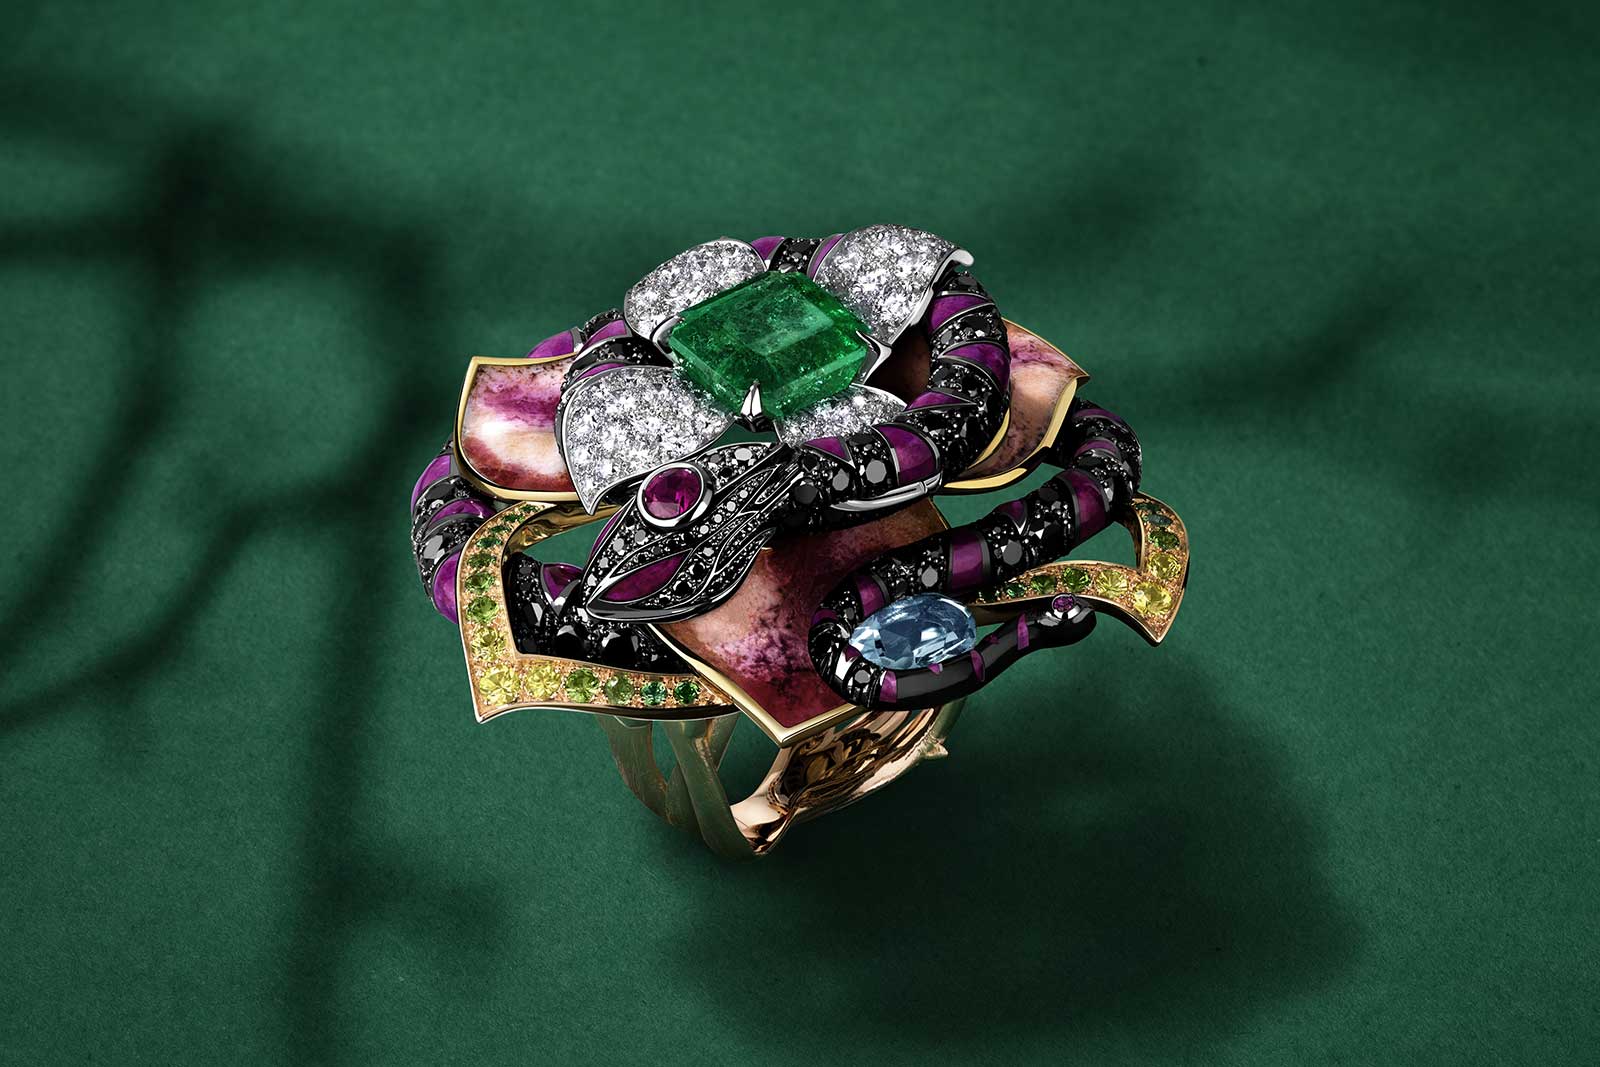  Jewellery Orchestra ‘Boa Constrictor' dis-engagement ring with 4 ct Colombian emerald, aquamarine, tsavorites, rubies, colourless and black diamonds and enamel in platinum, 18k yellow, pink and white gold